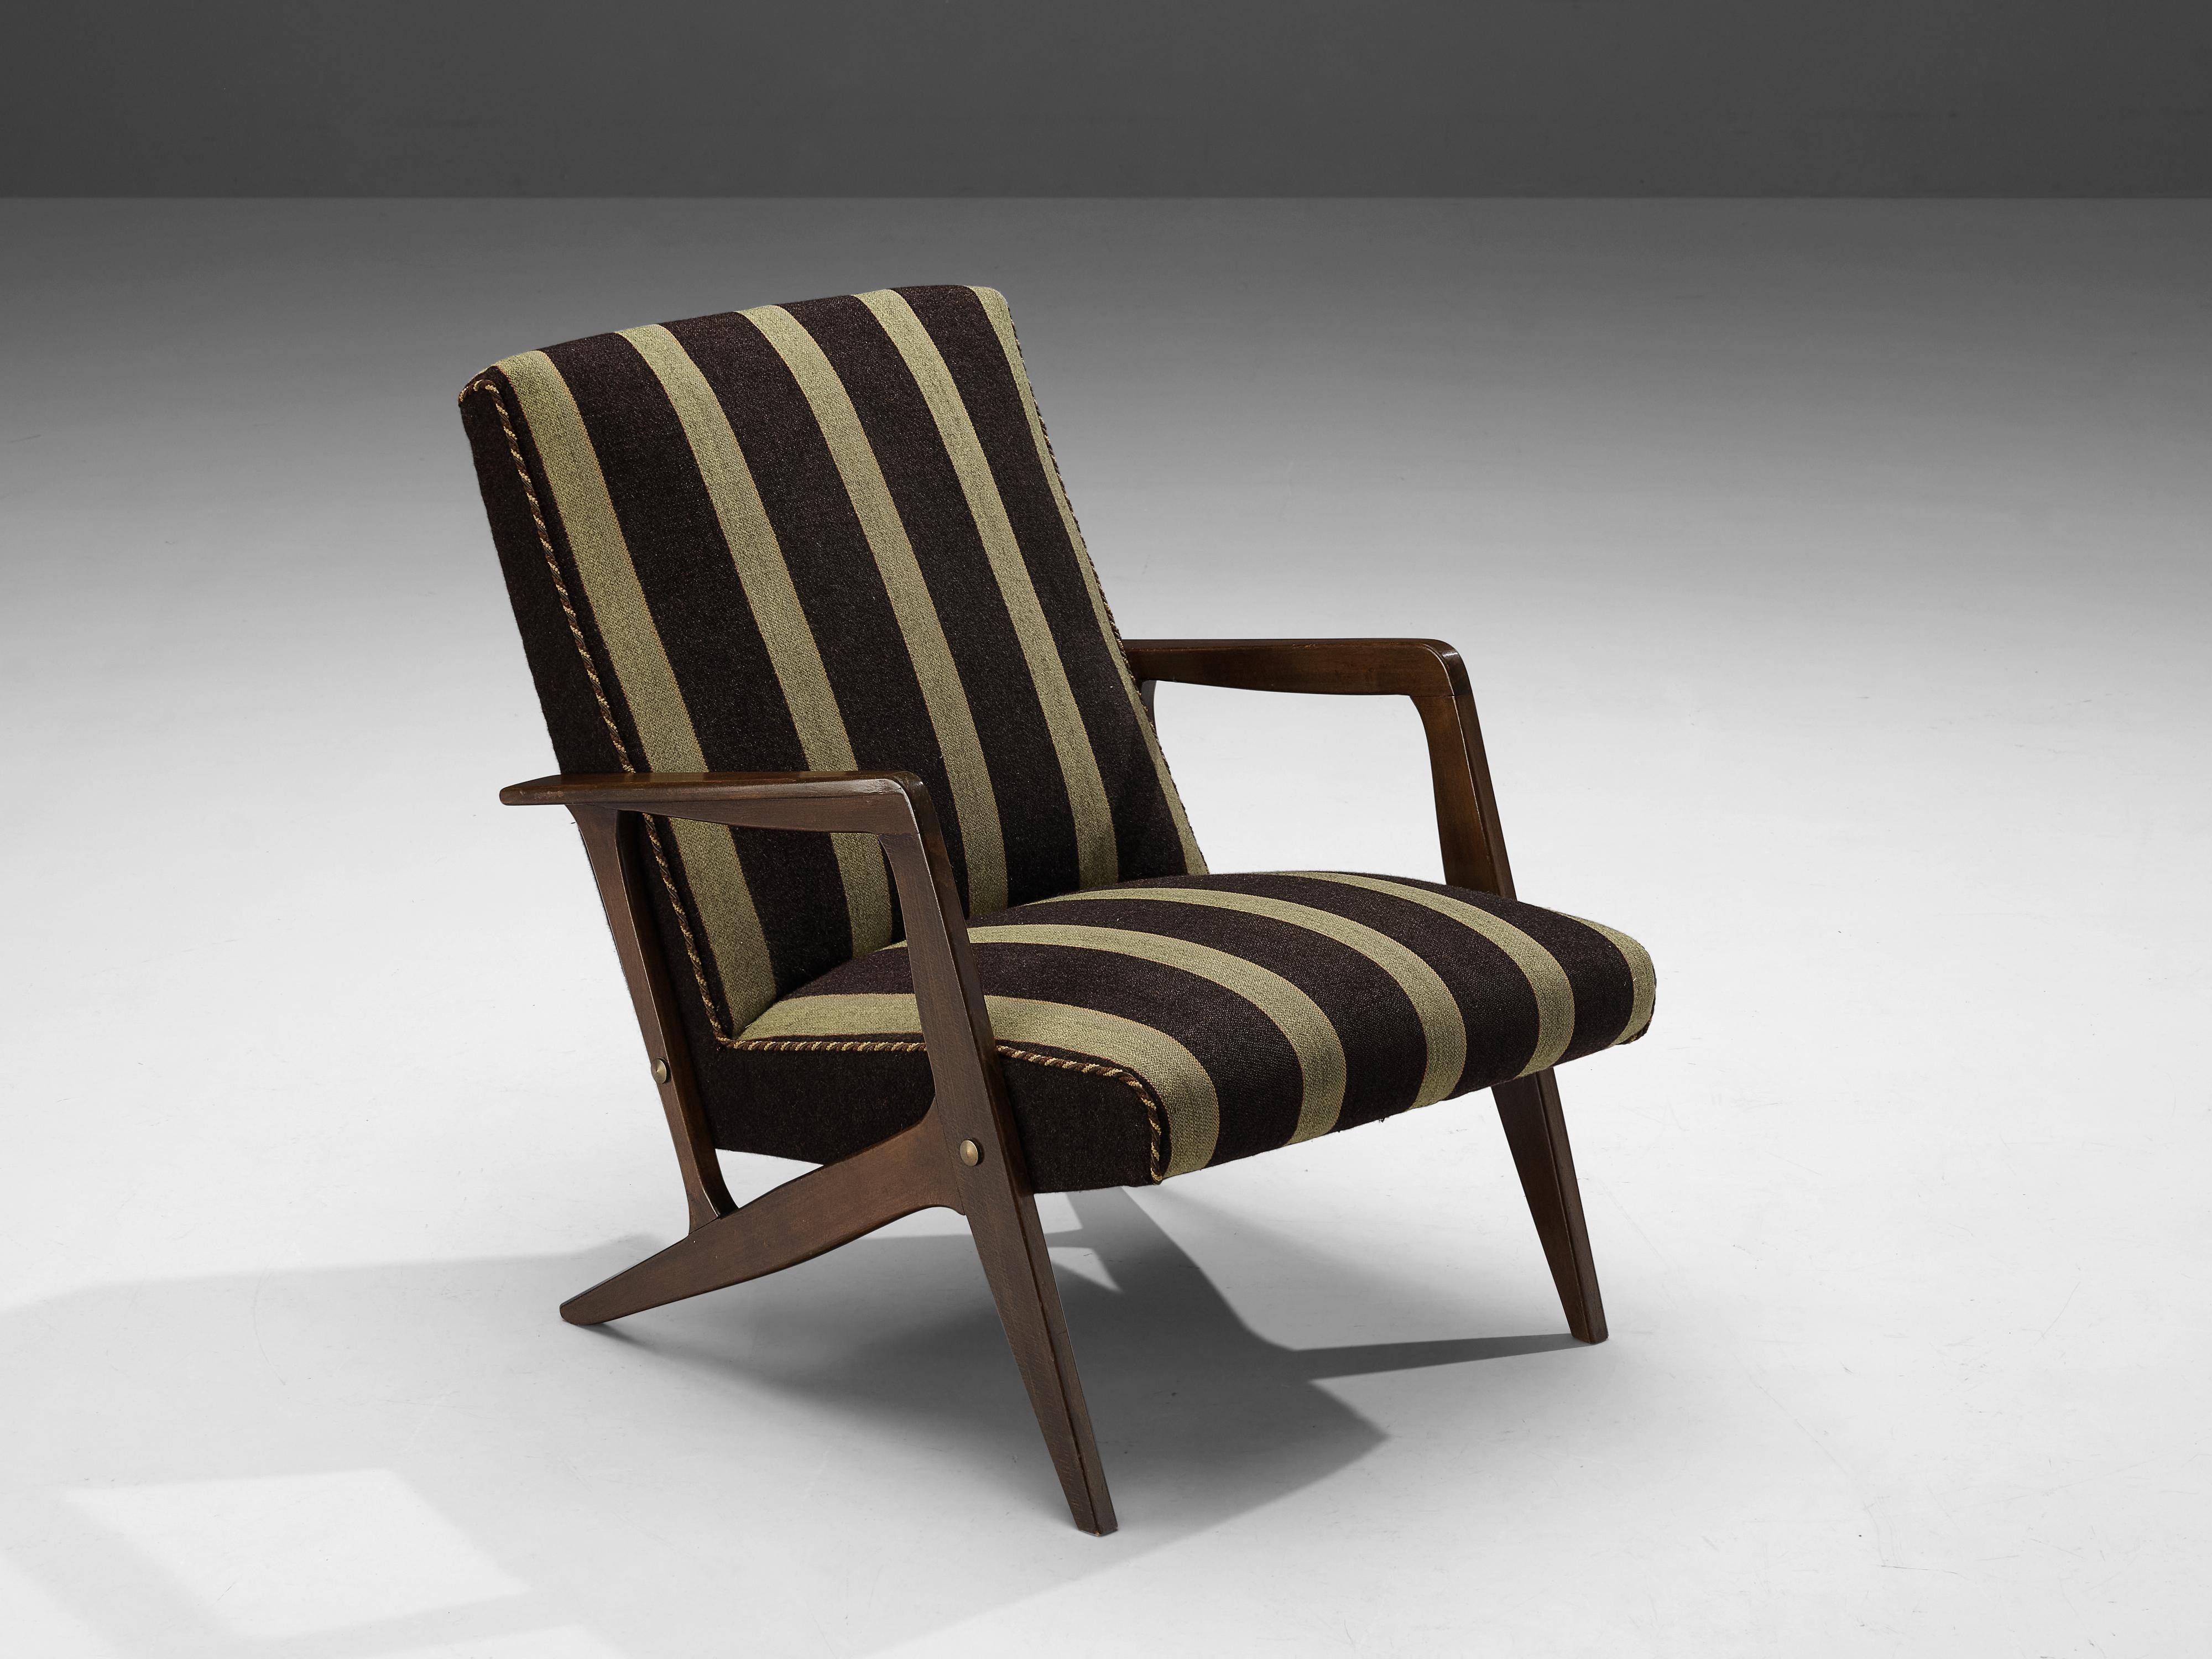 Fabric Danish Lounge Chair in Brown Striped Upholstery